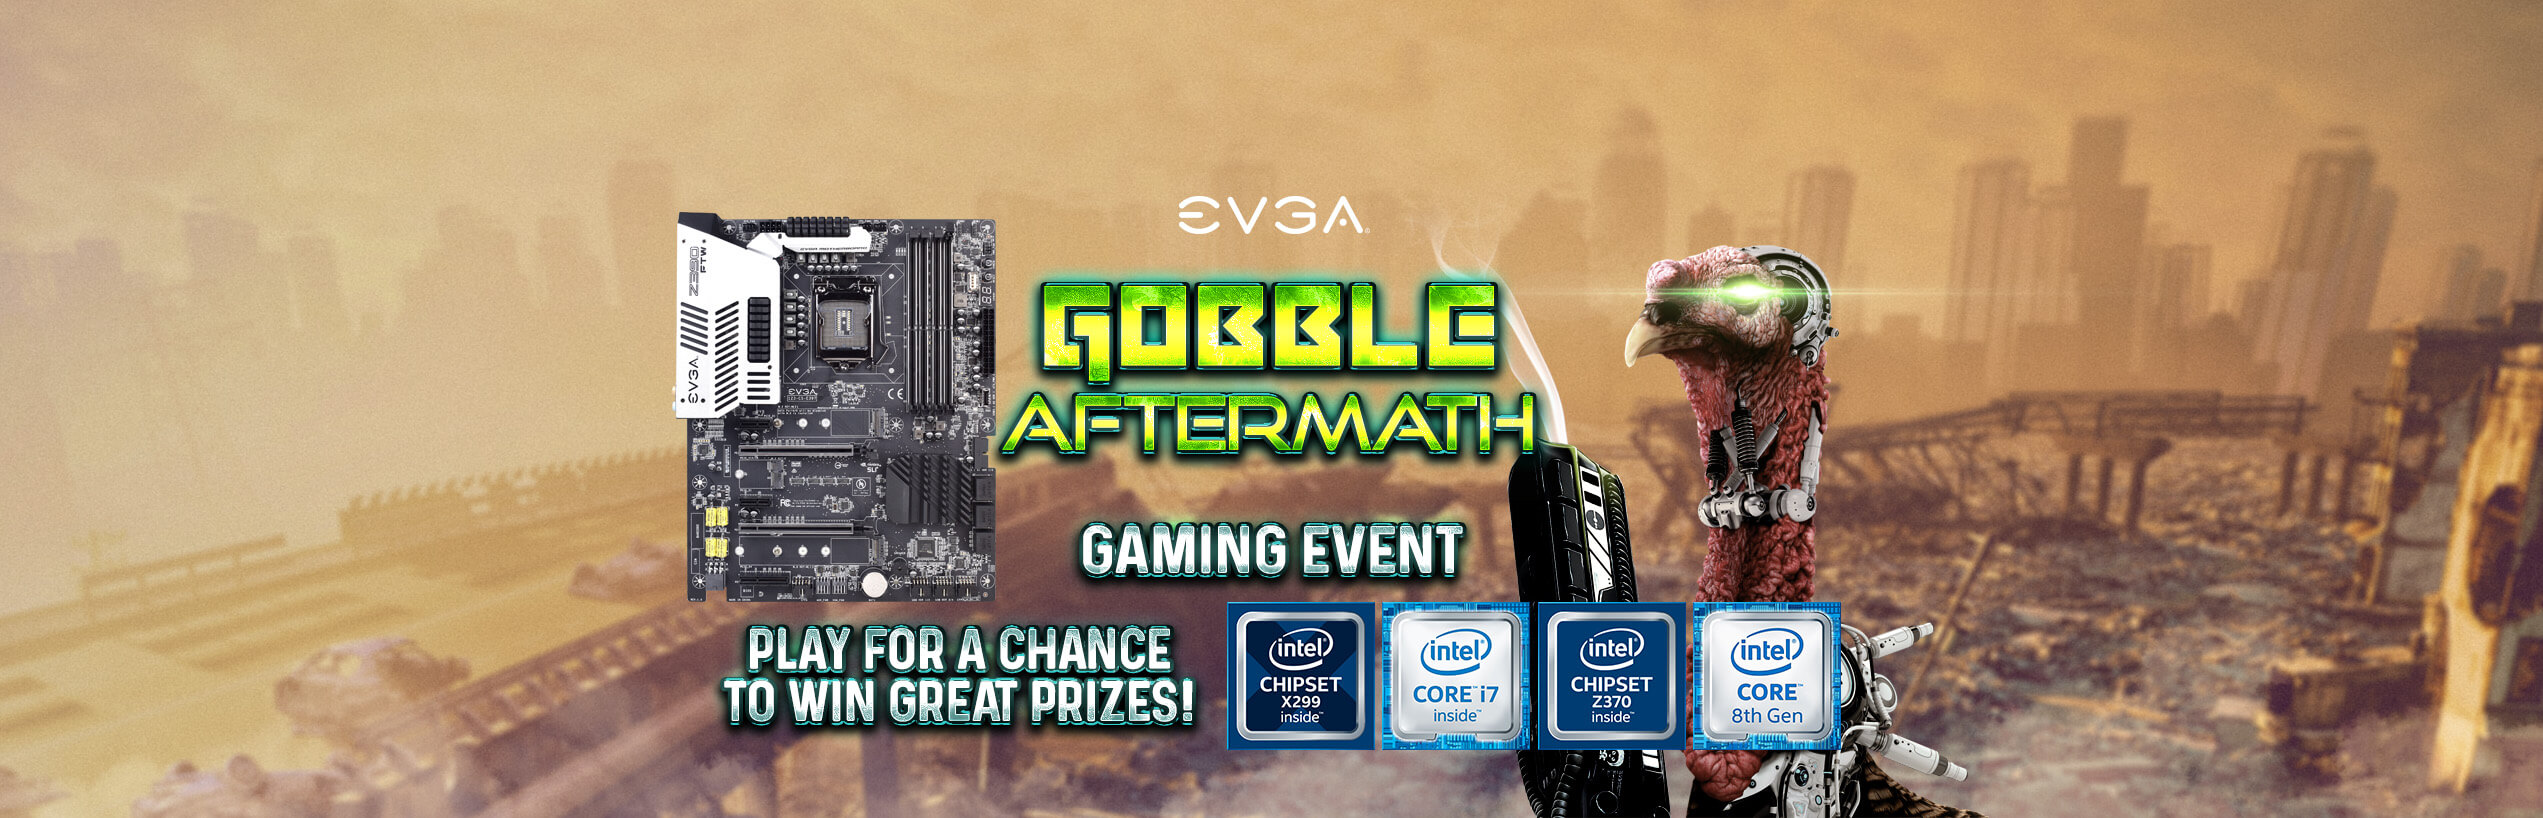 Gobble Aftermath Gaming Event